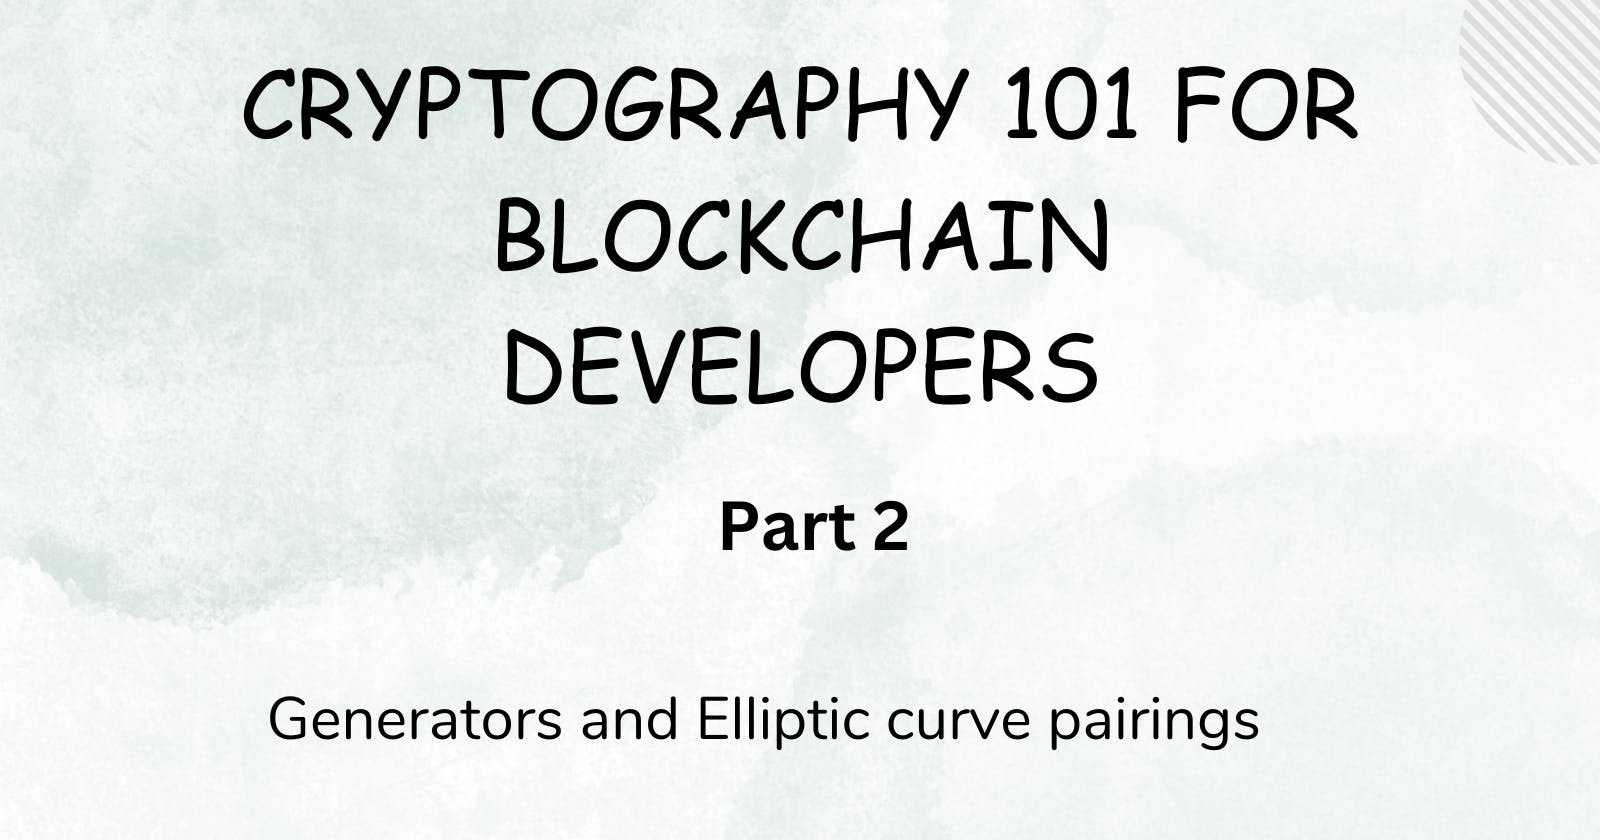 Cryptography 101 for Blockchain Developers (Part 2)